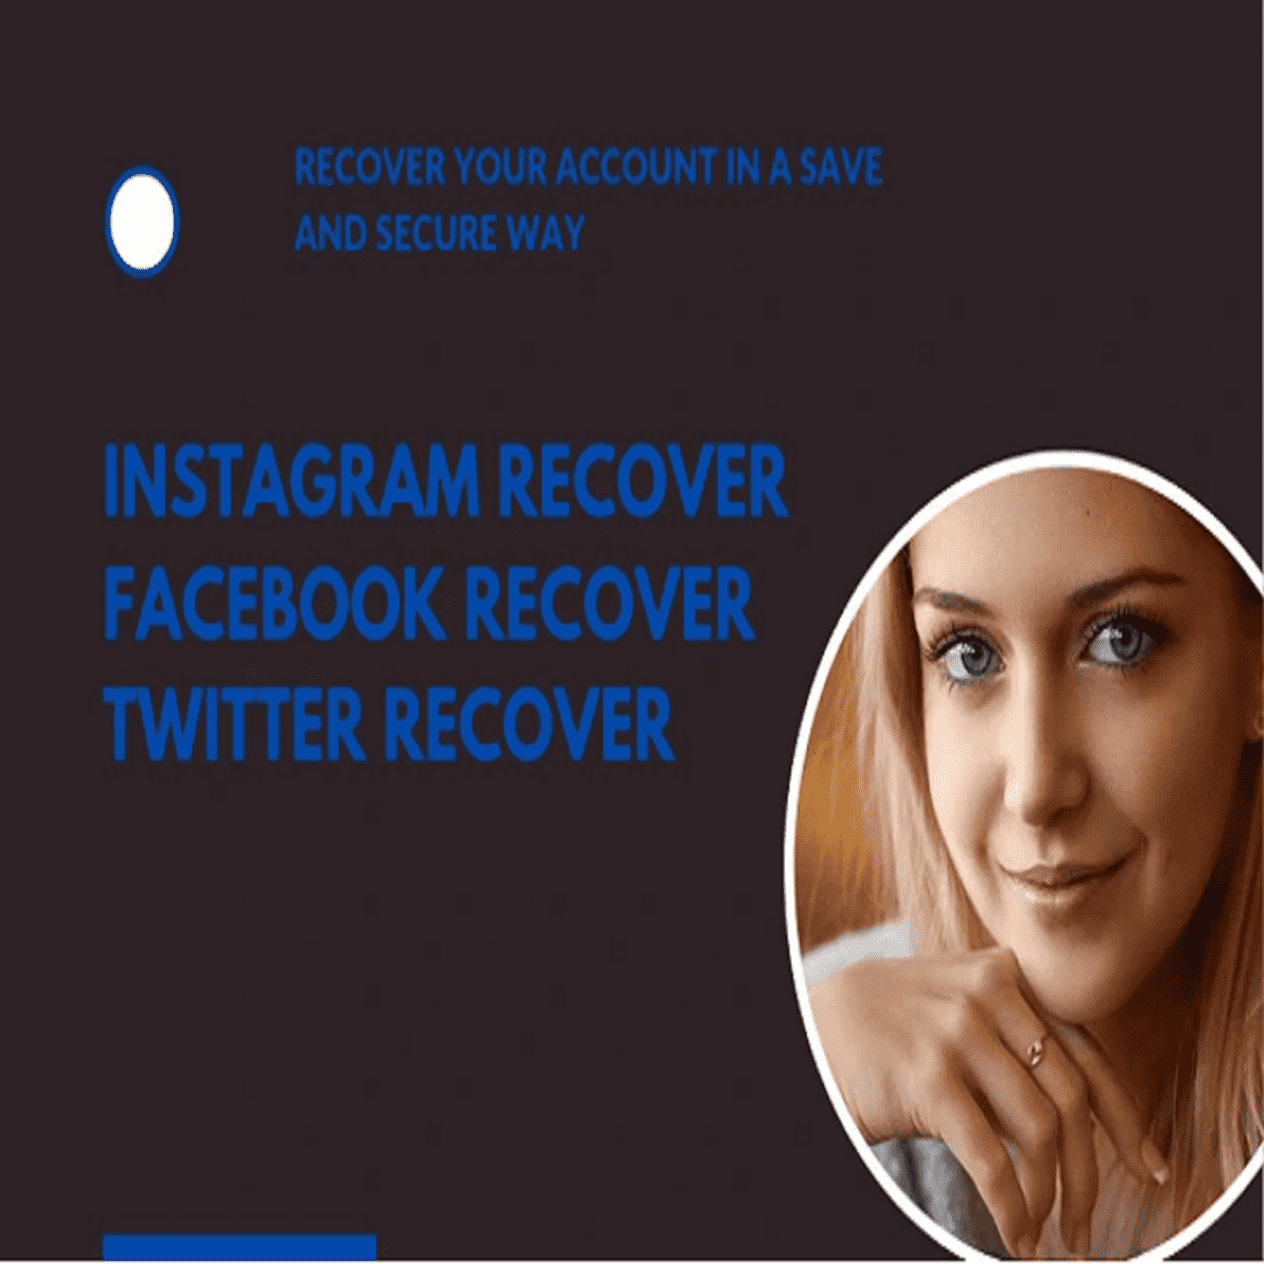 I will Do facebook recovery, instagram recovery and twitter recovery perfectly